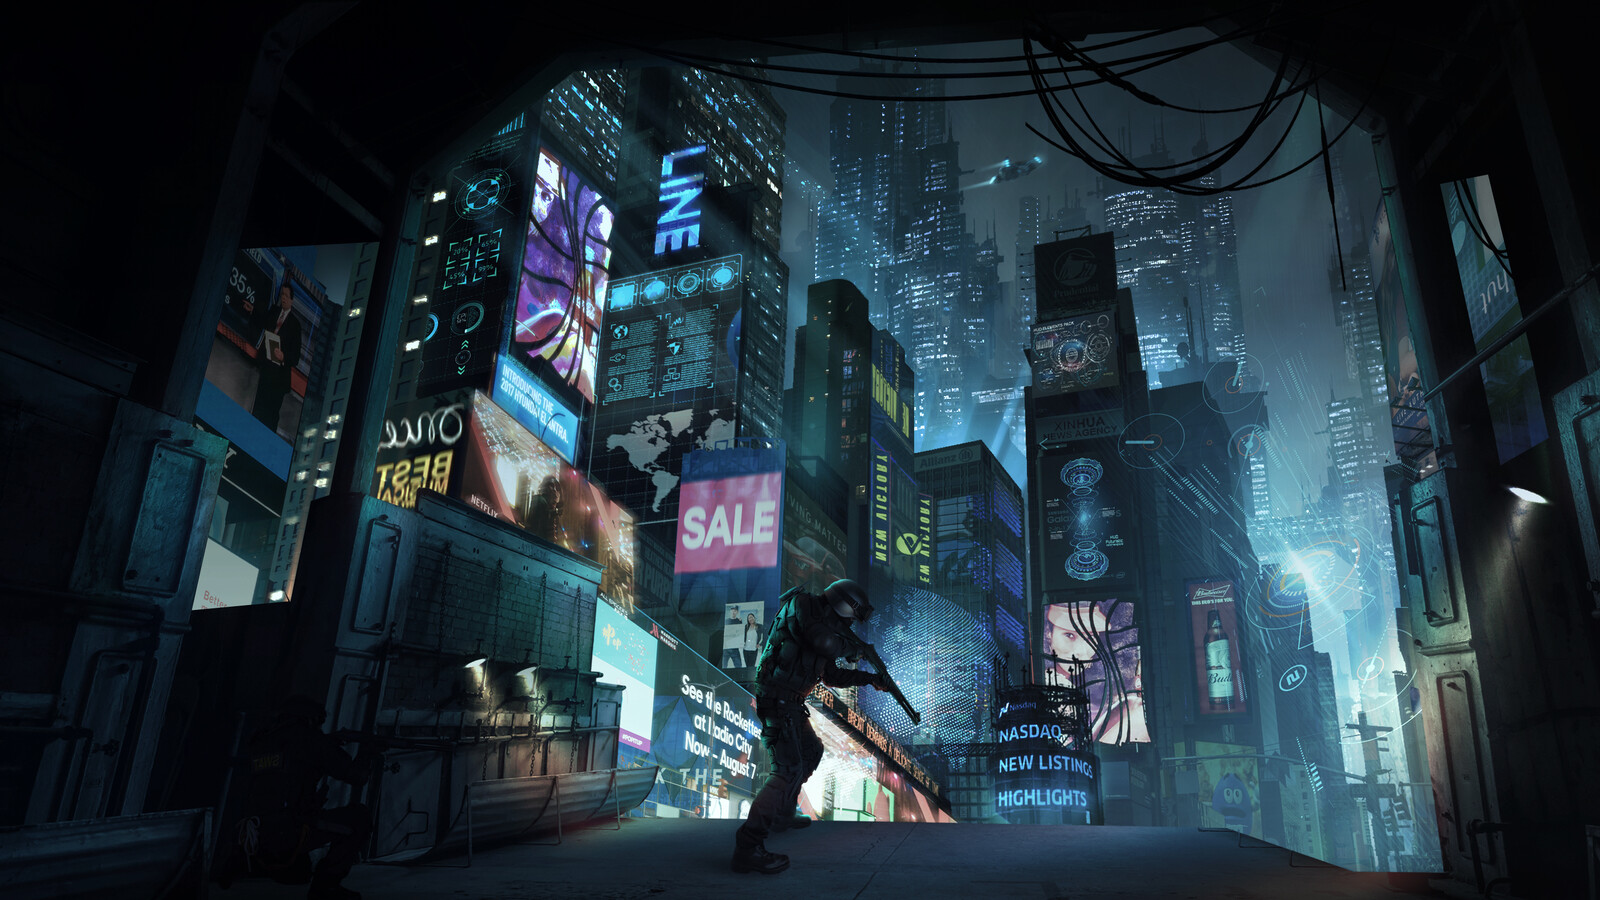 NYC Time Square in Cyberpunk style